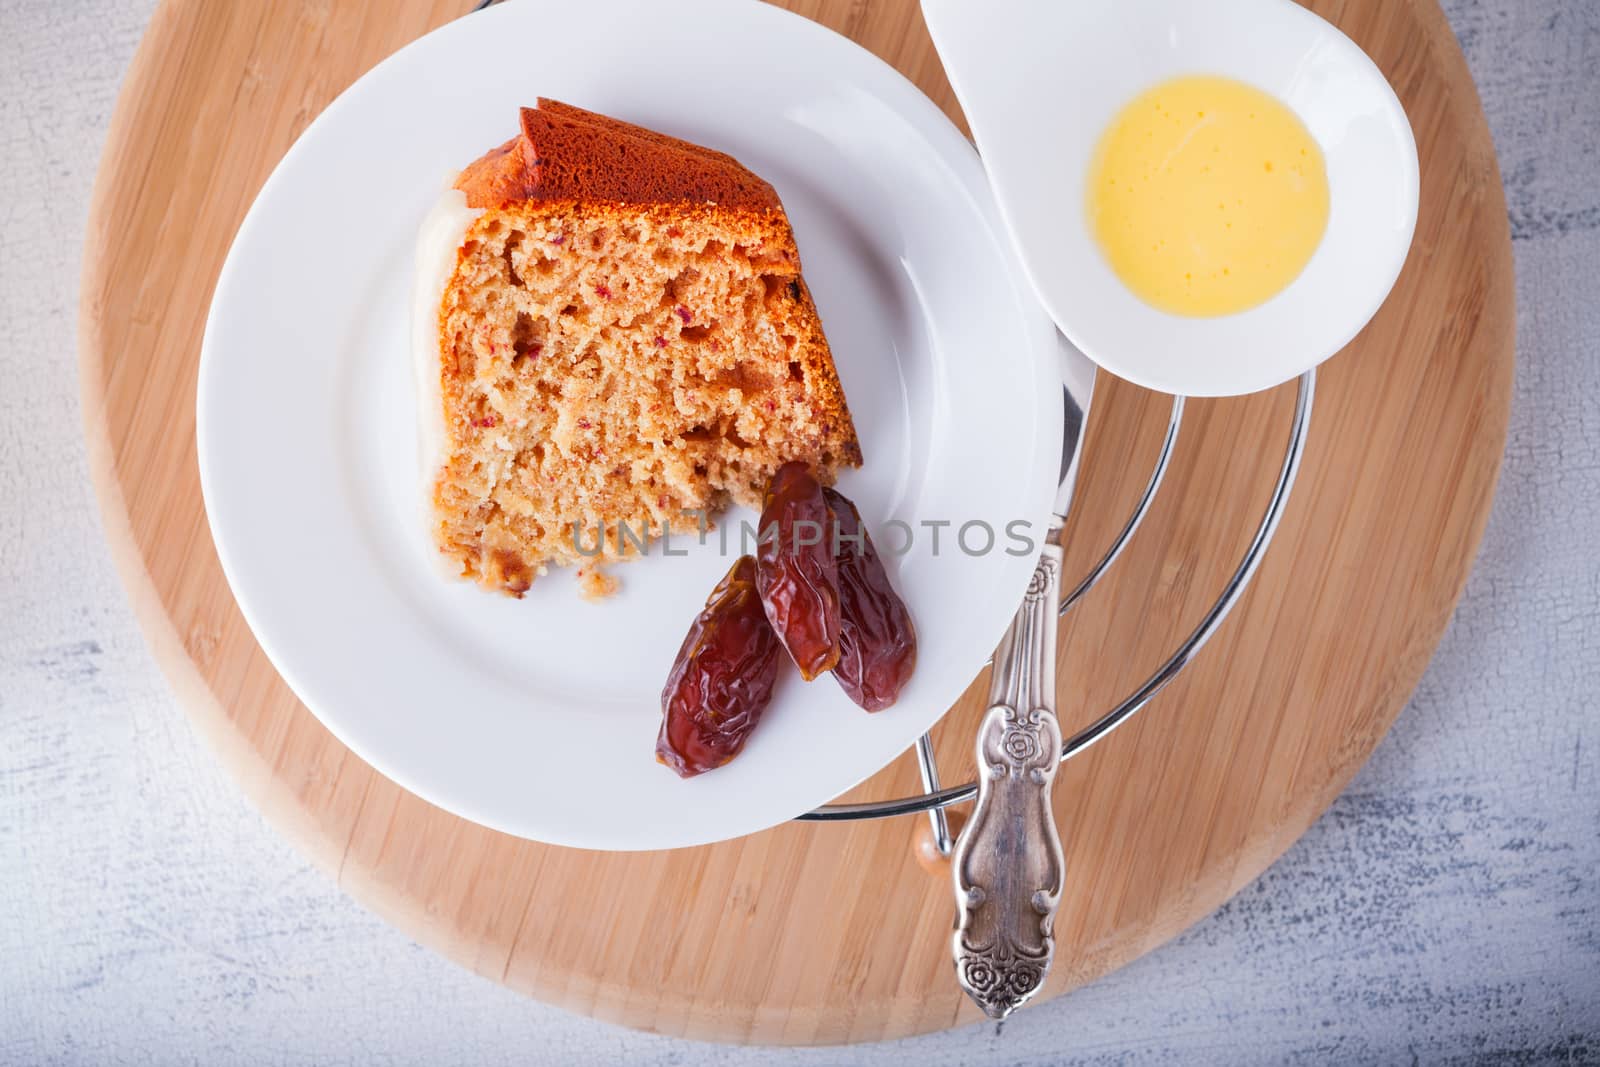 A slice of Date cake on a white napkin